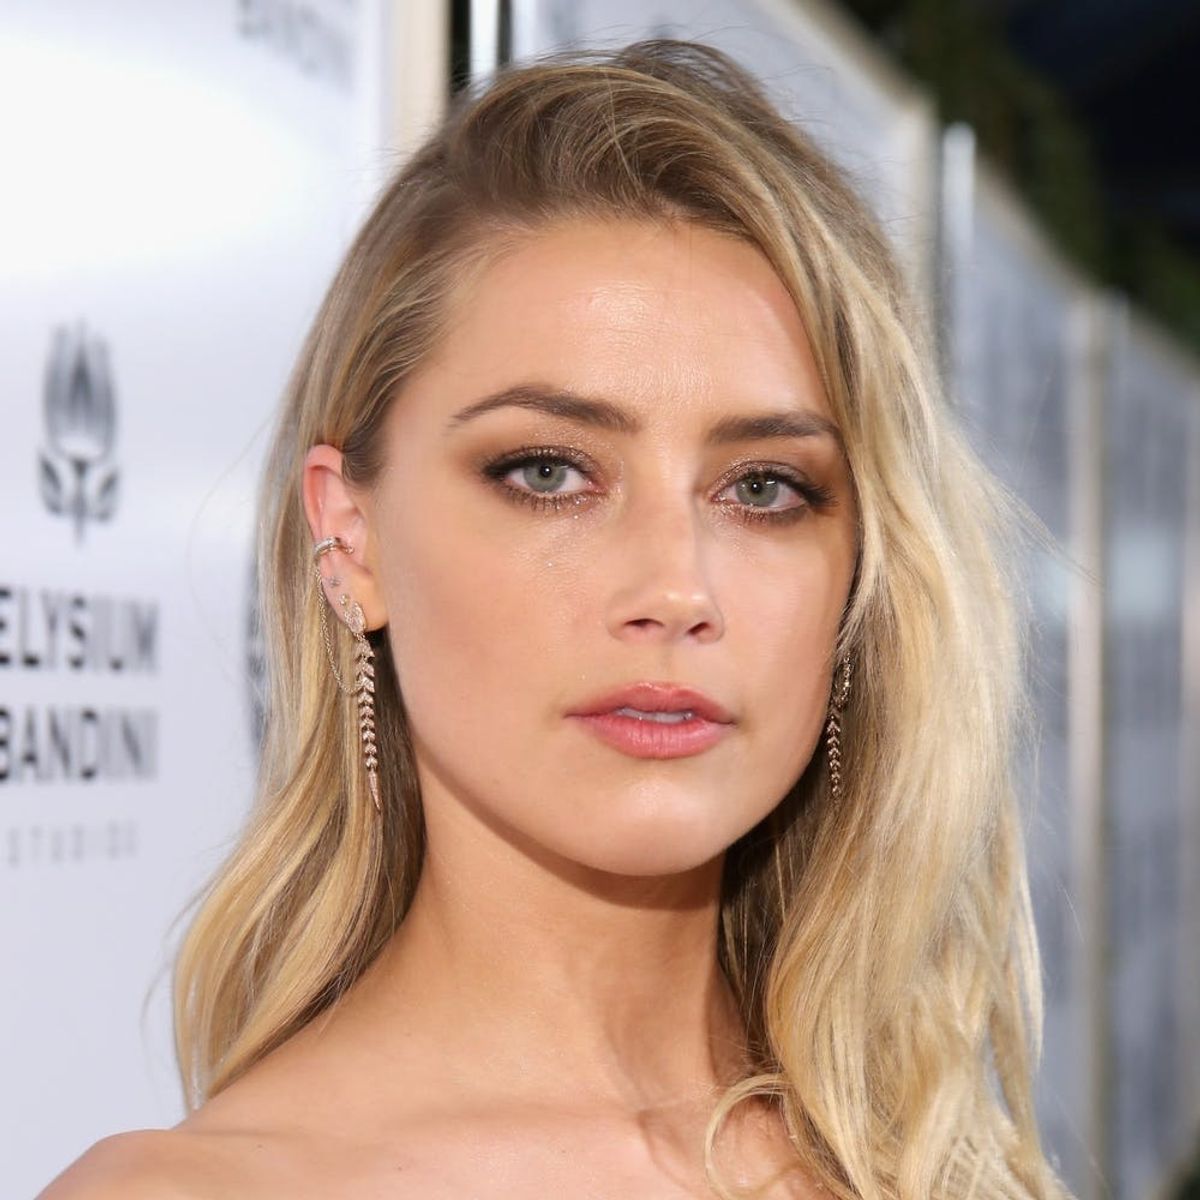 Amber Heard Says Her New Film’s Risqué Scenes Were Filmed Without Her Consent